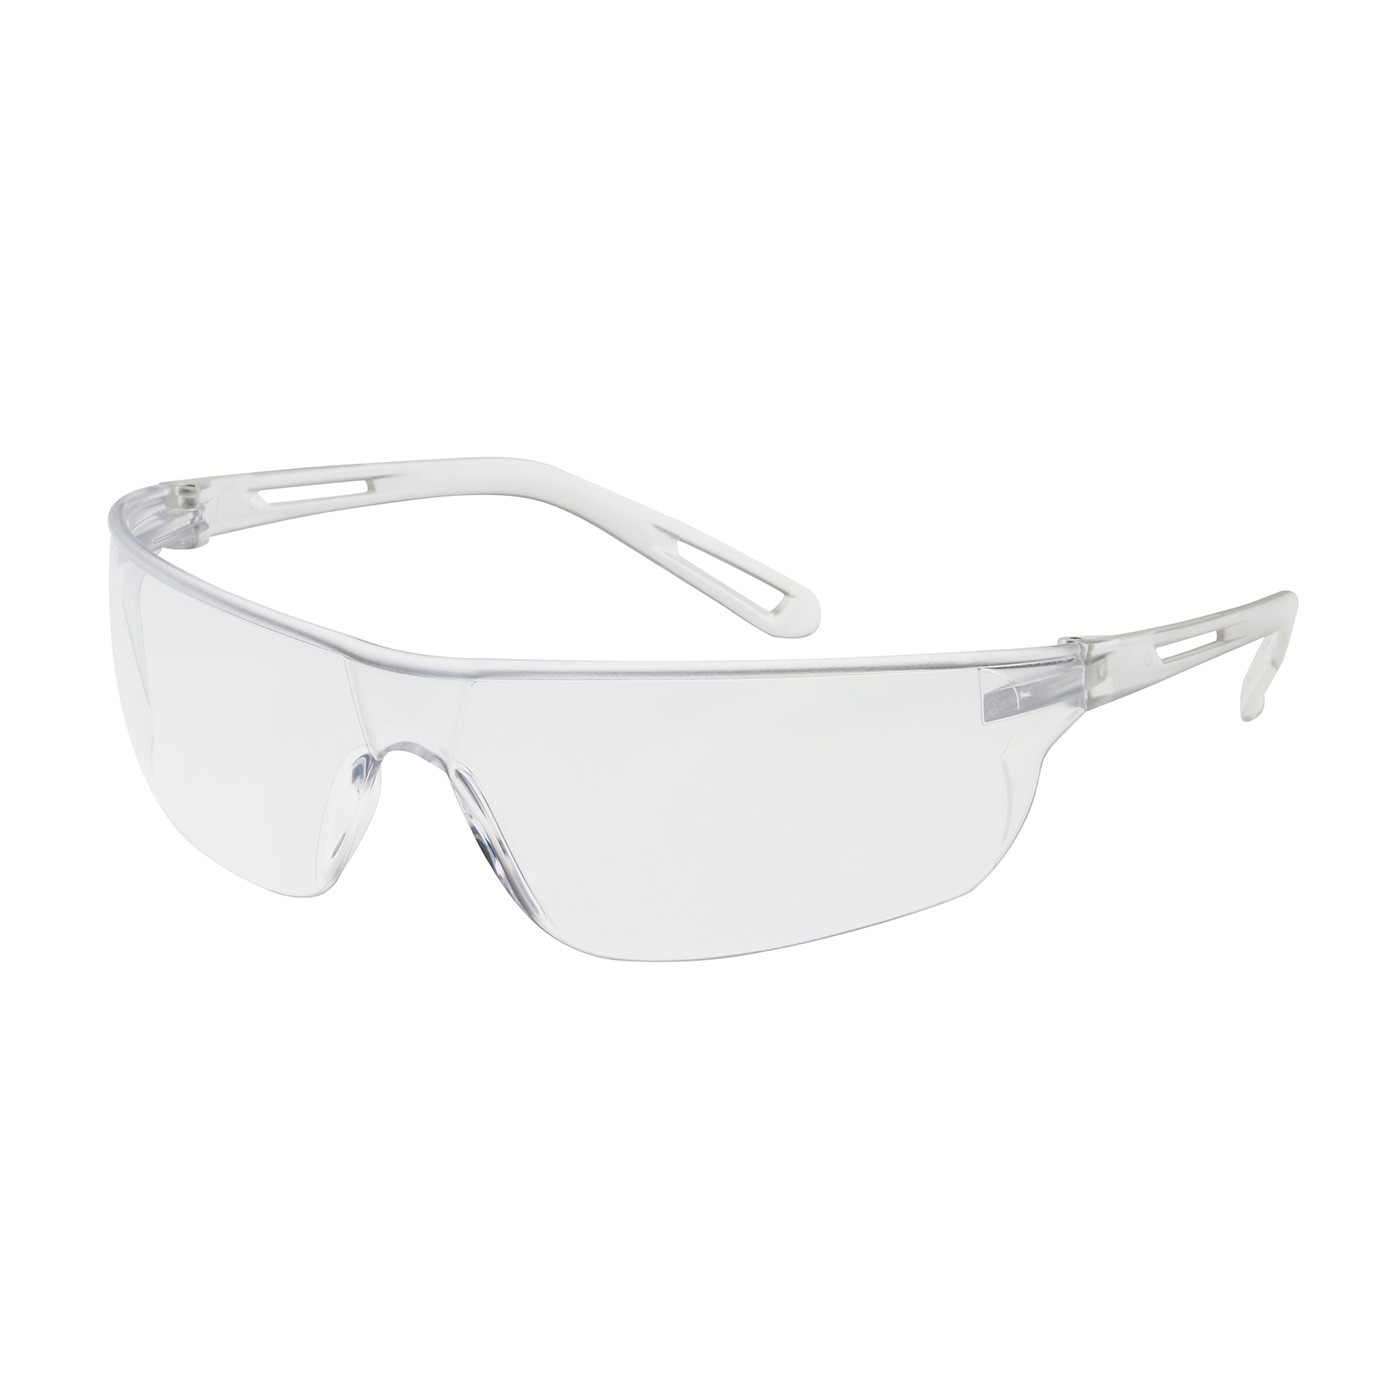 Zenon Z-Lyte™ Rimless Safety Glasses with Clear Temple, Clear Lens and Anti-Scratch Coating  (#250-09-0000)